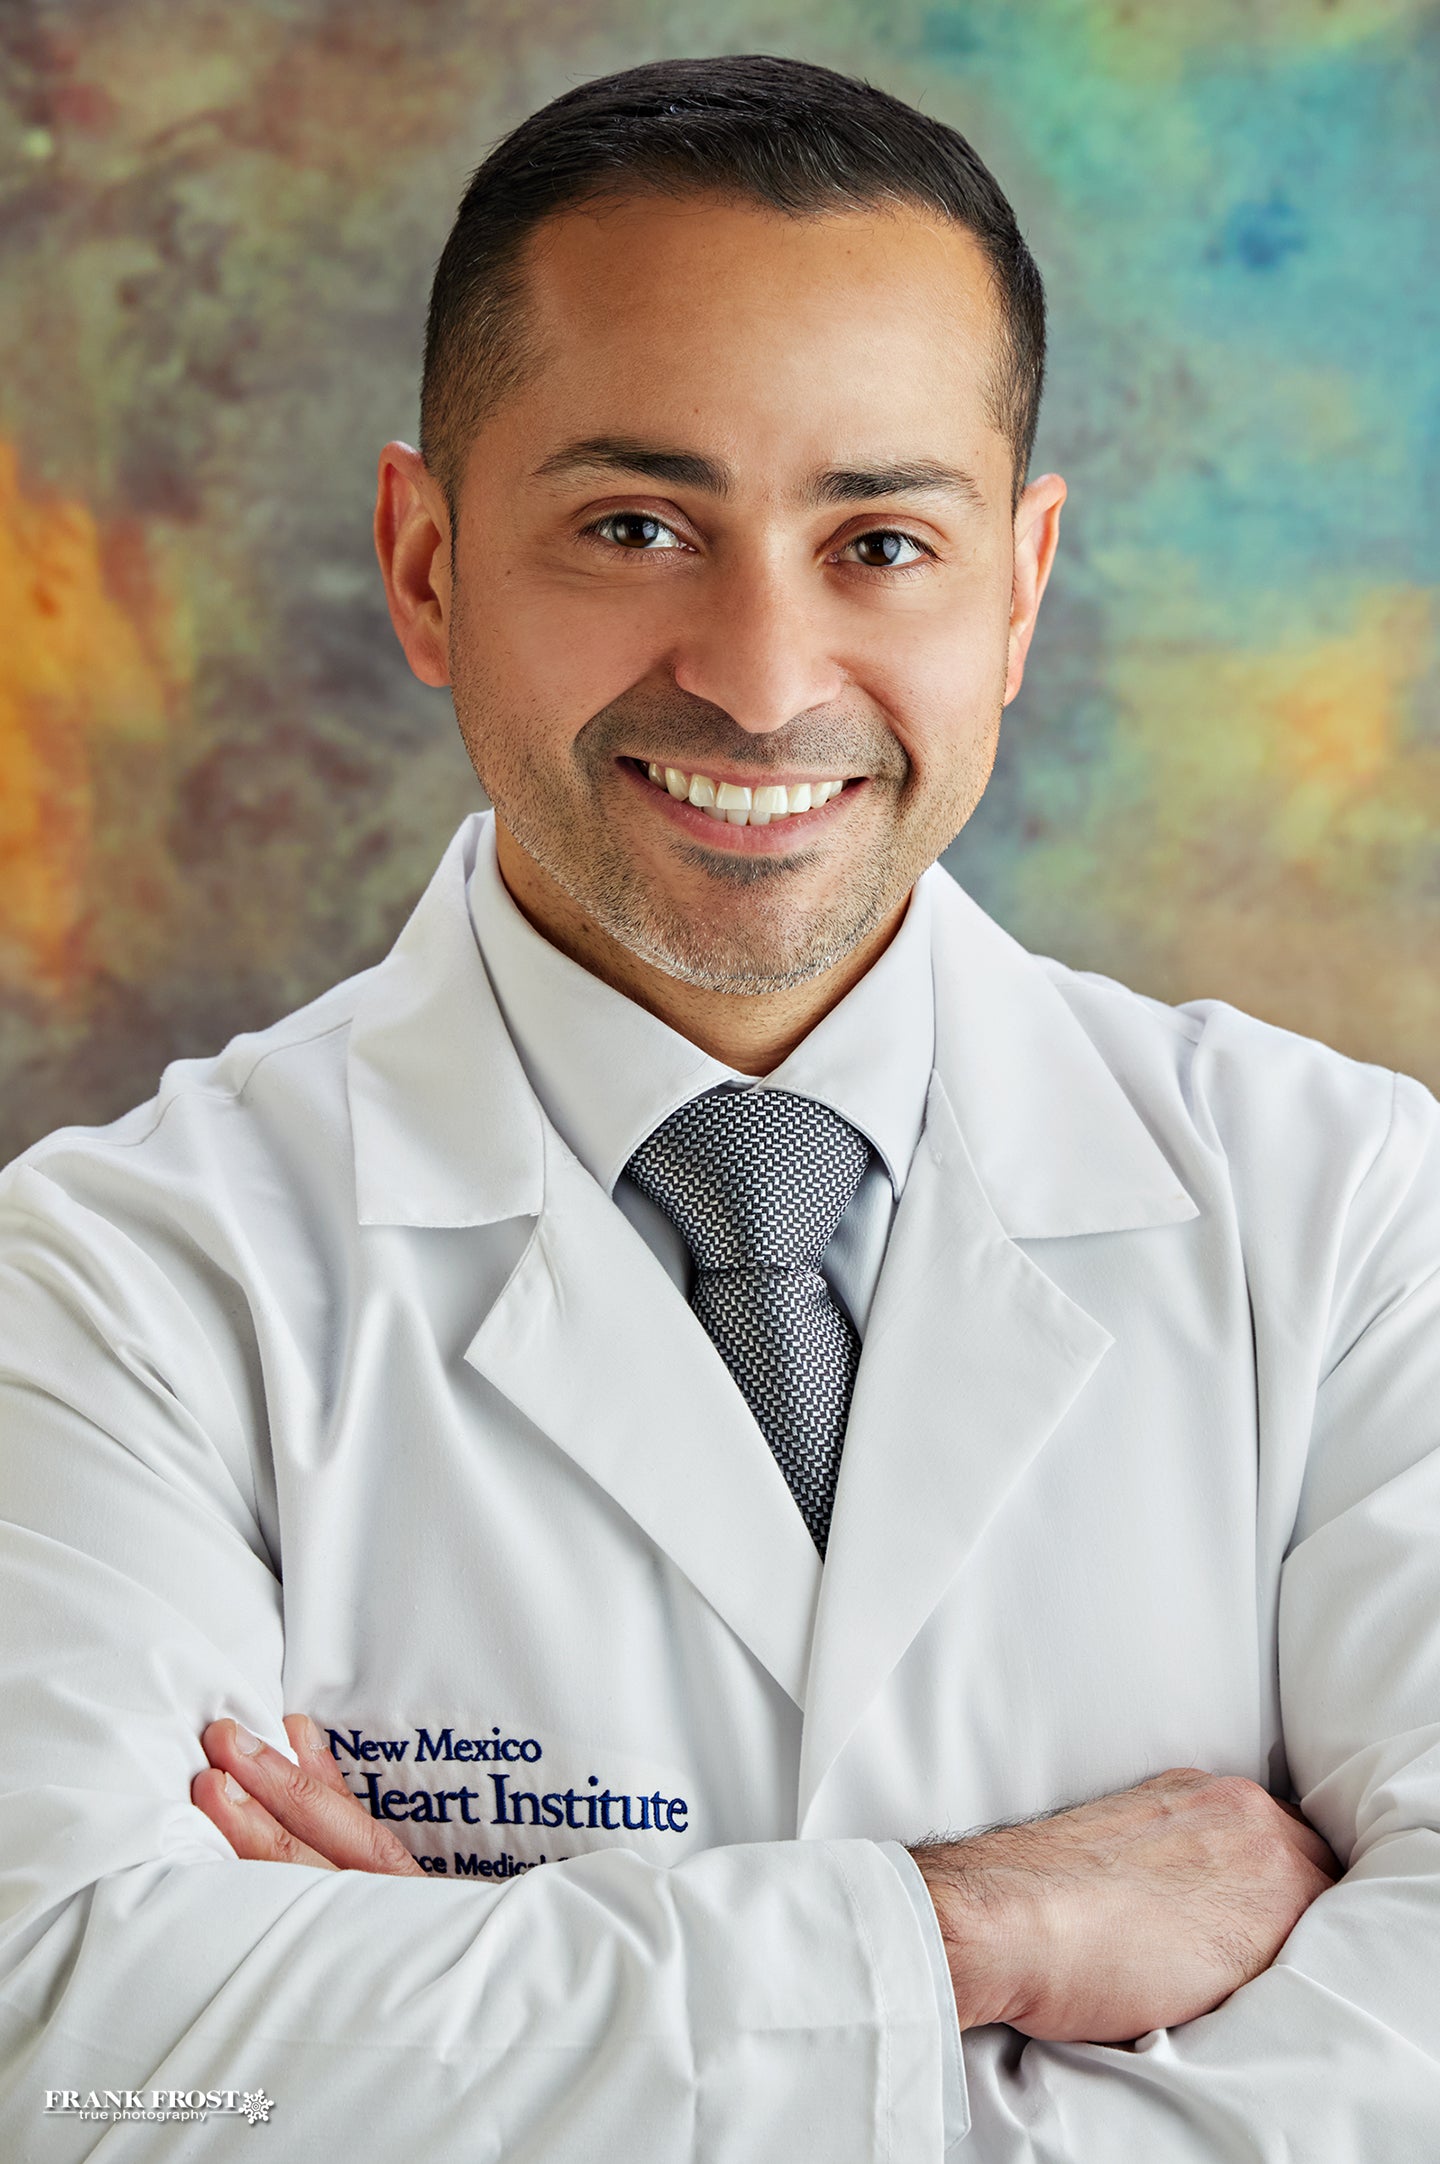 Luis Cerda, M.D. | Lovelace Health System in New Mexico